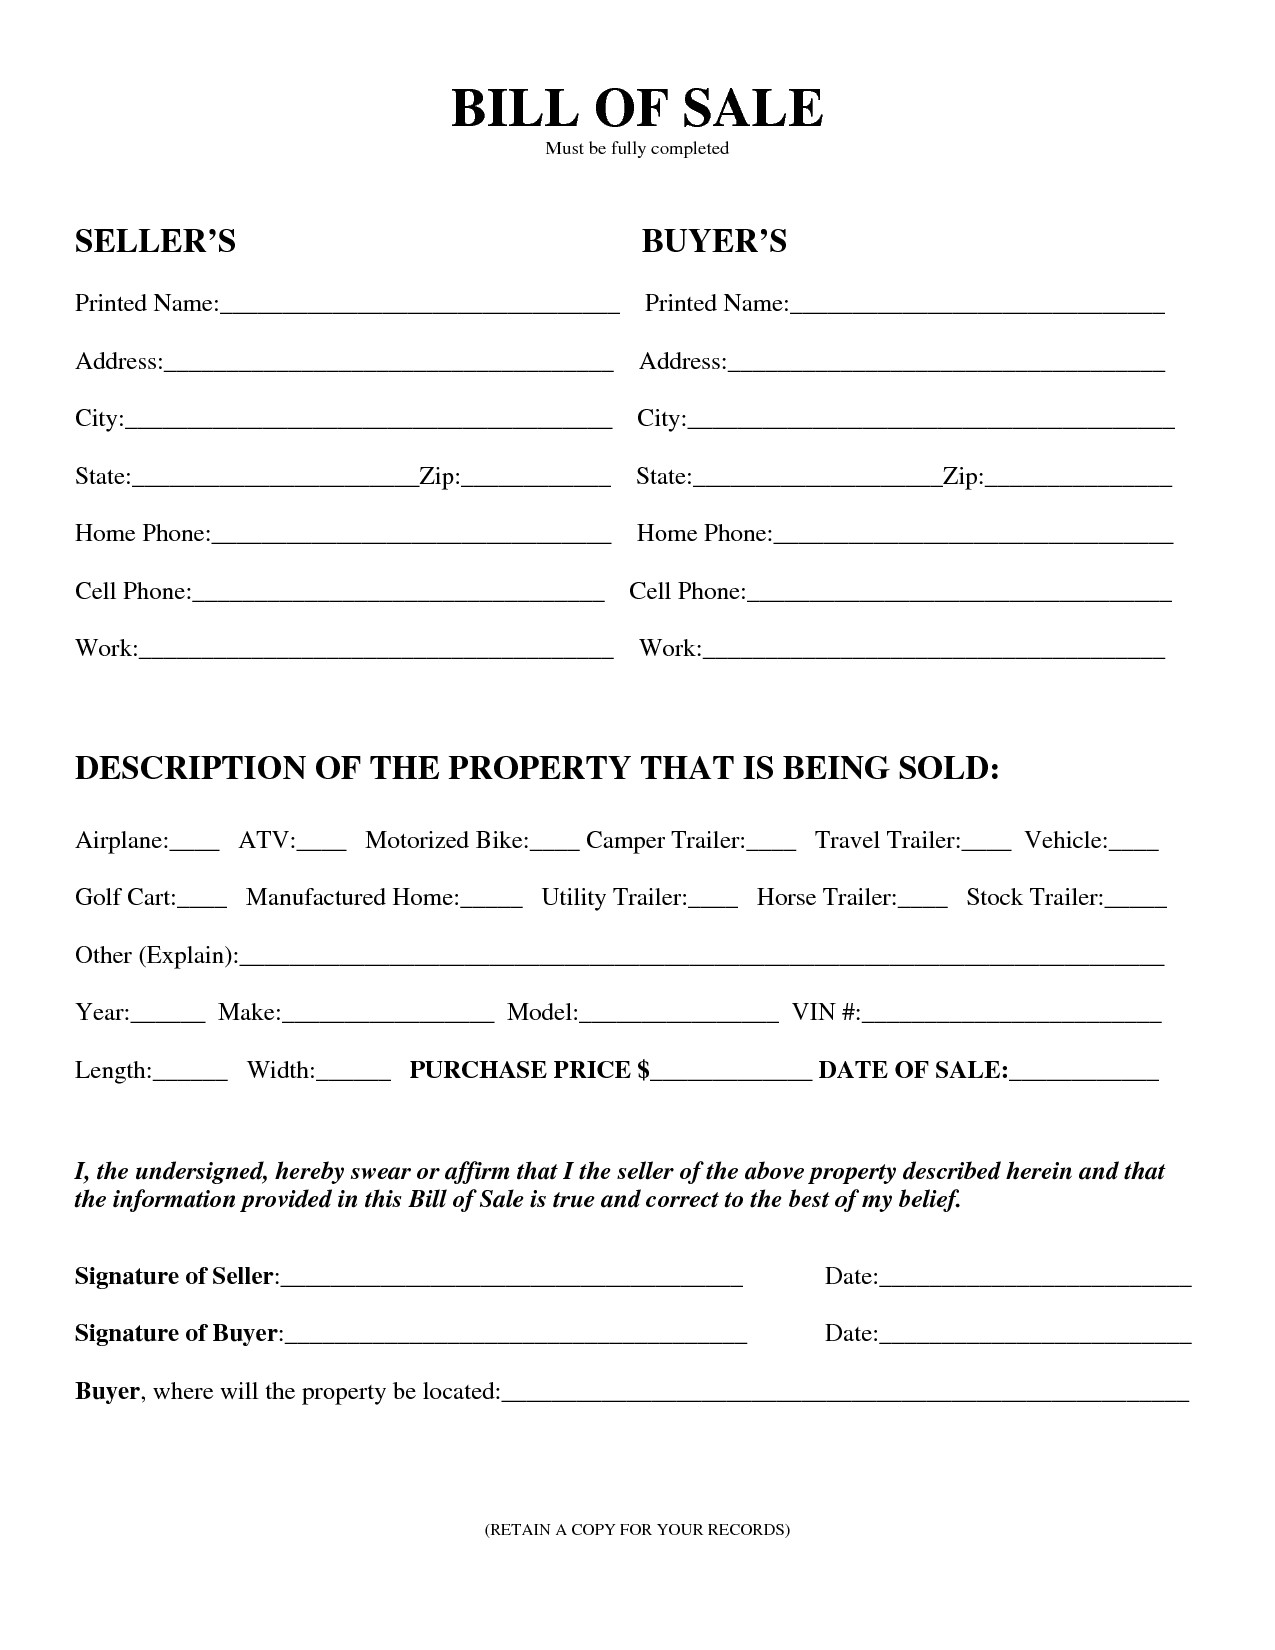 Bill Of Sale Images Download Bill Sale forms – Pdf Templates